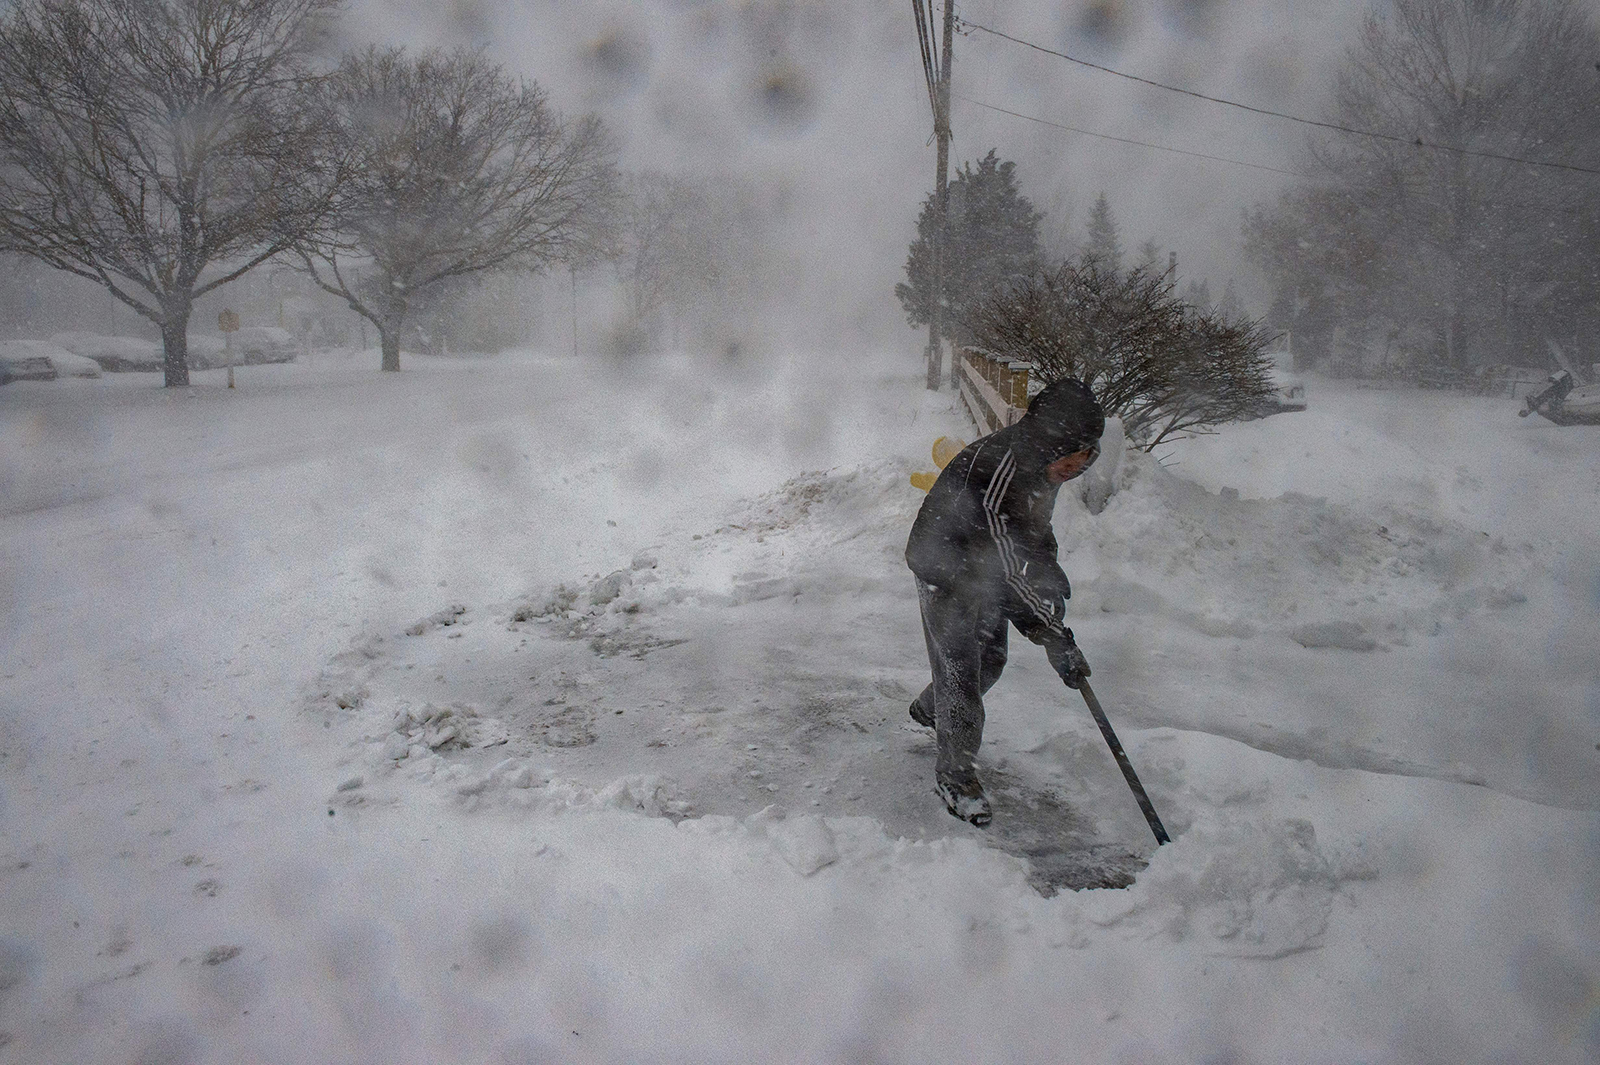 A man shovels snow in near-white conditions during a ski event in Marshfield, Massachusetts, on January 29.